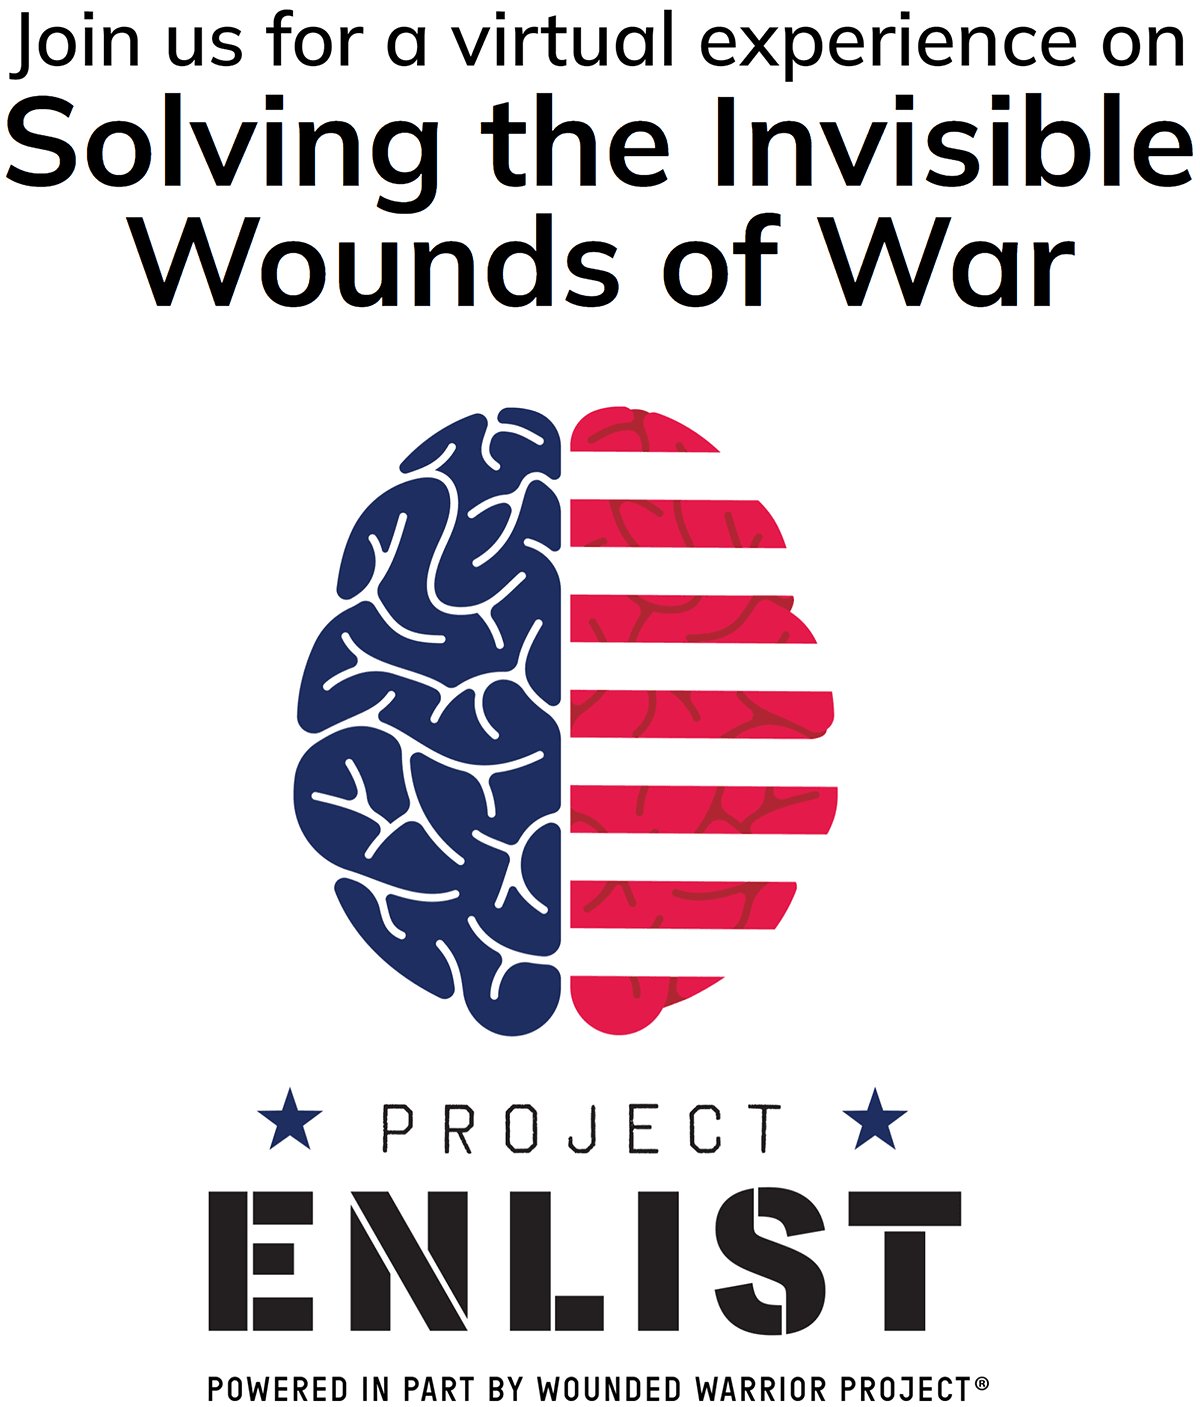 Solving the Invisible Wounds of War - Project ENLIST logo